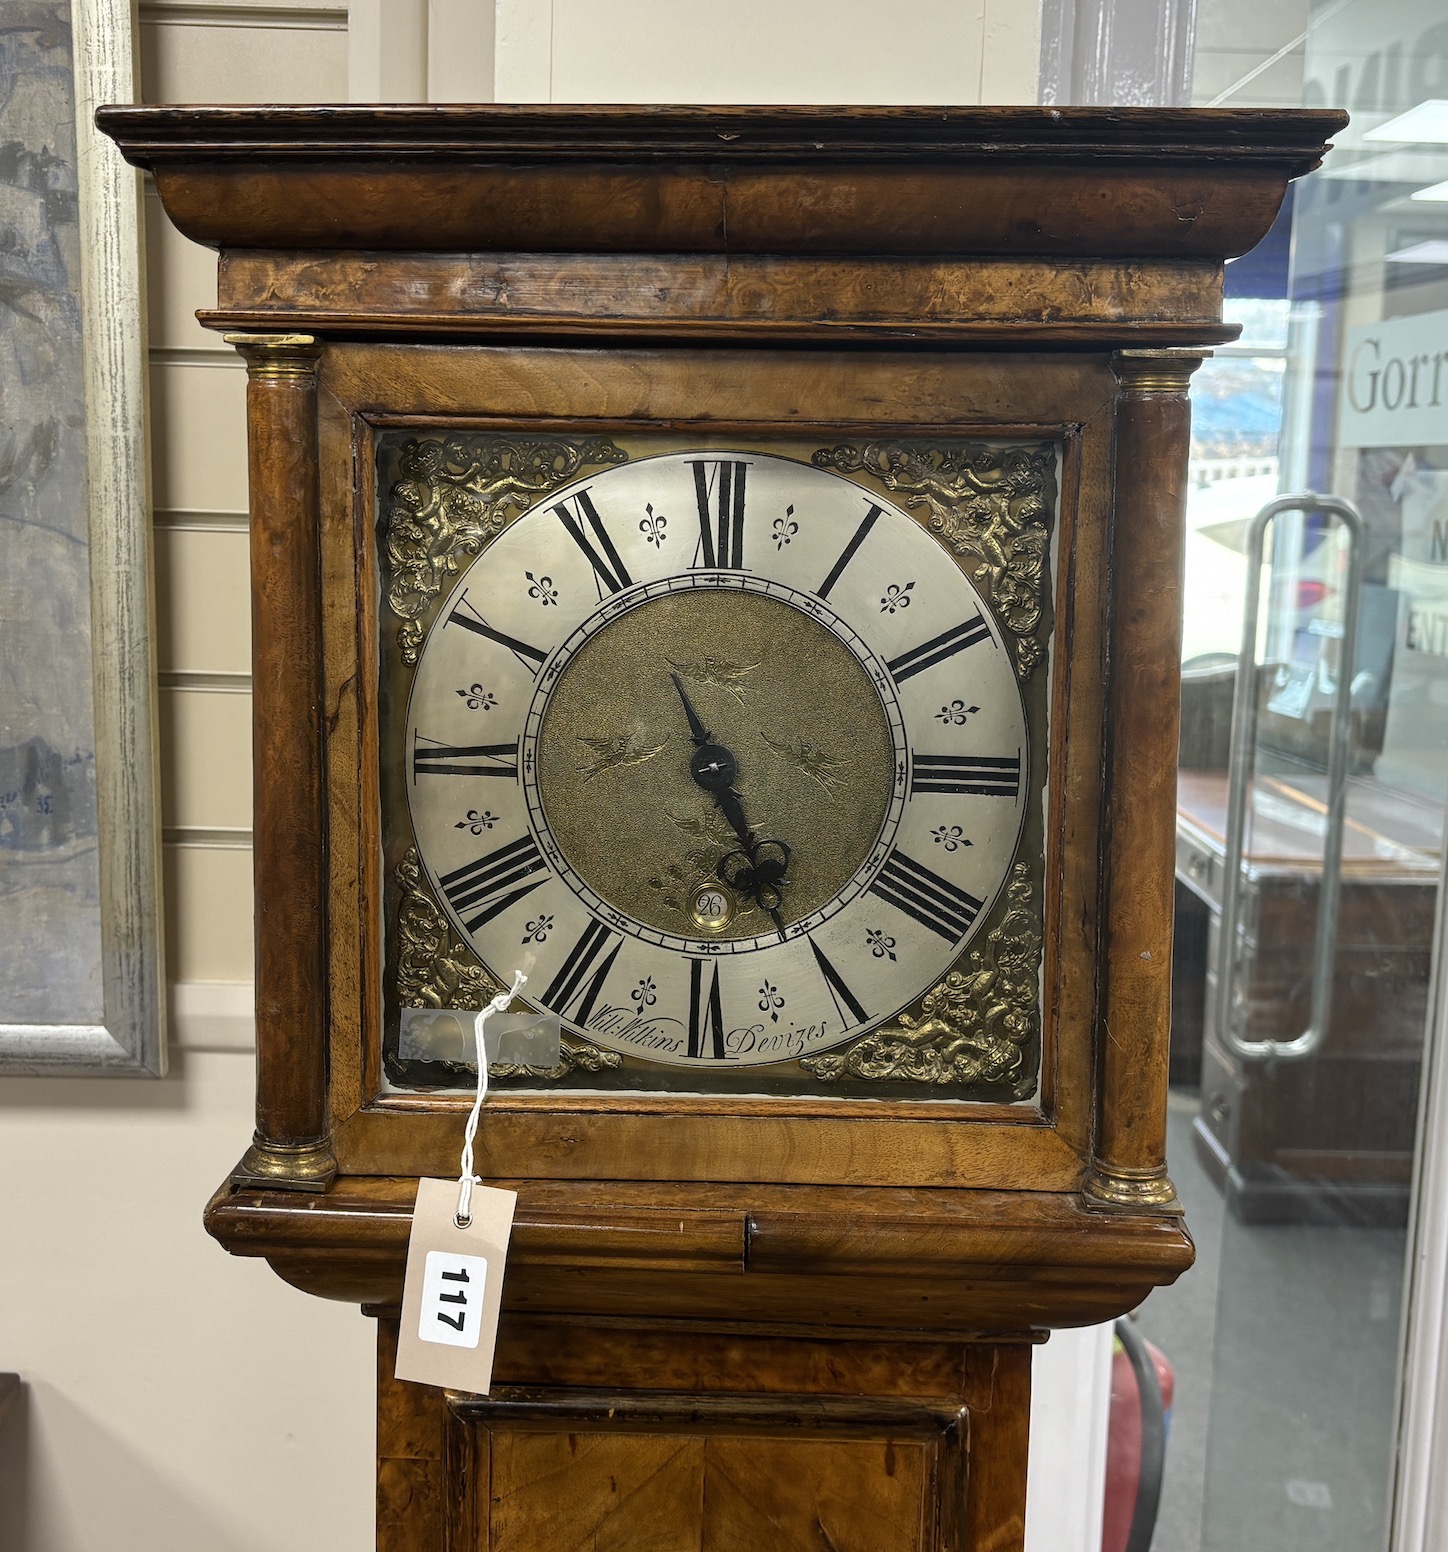 William Wilkins, Devizes. An 18th century 10 inch thirty hour longcase clock dial with date aperture, later figured walnut case height 175cm